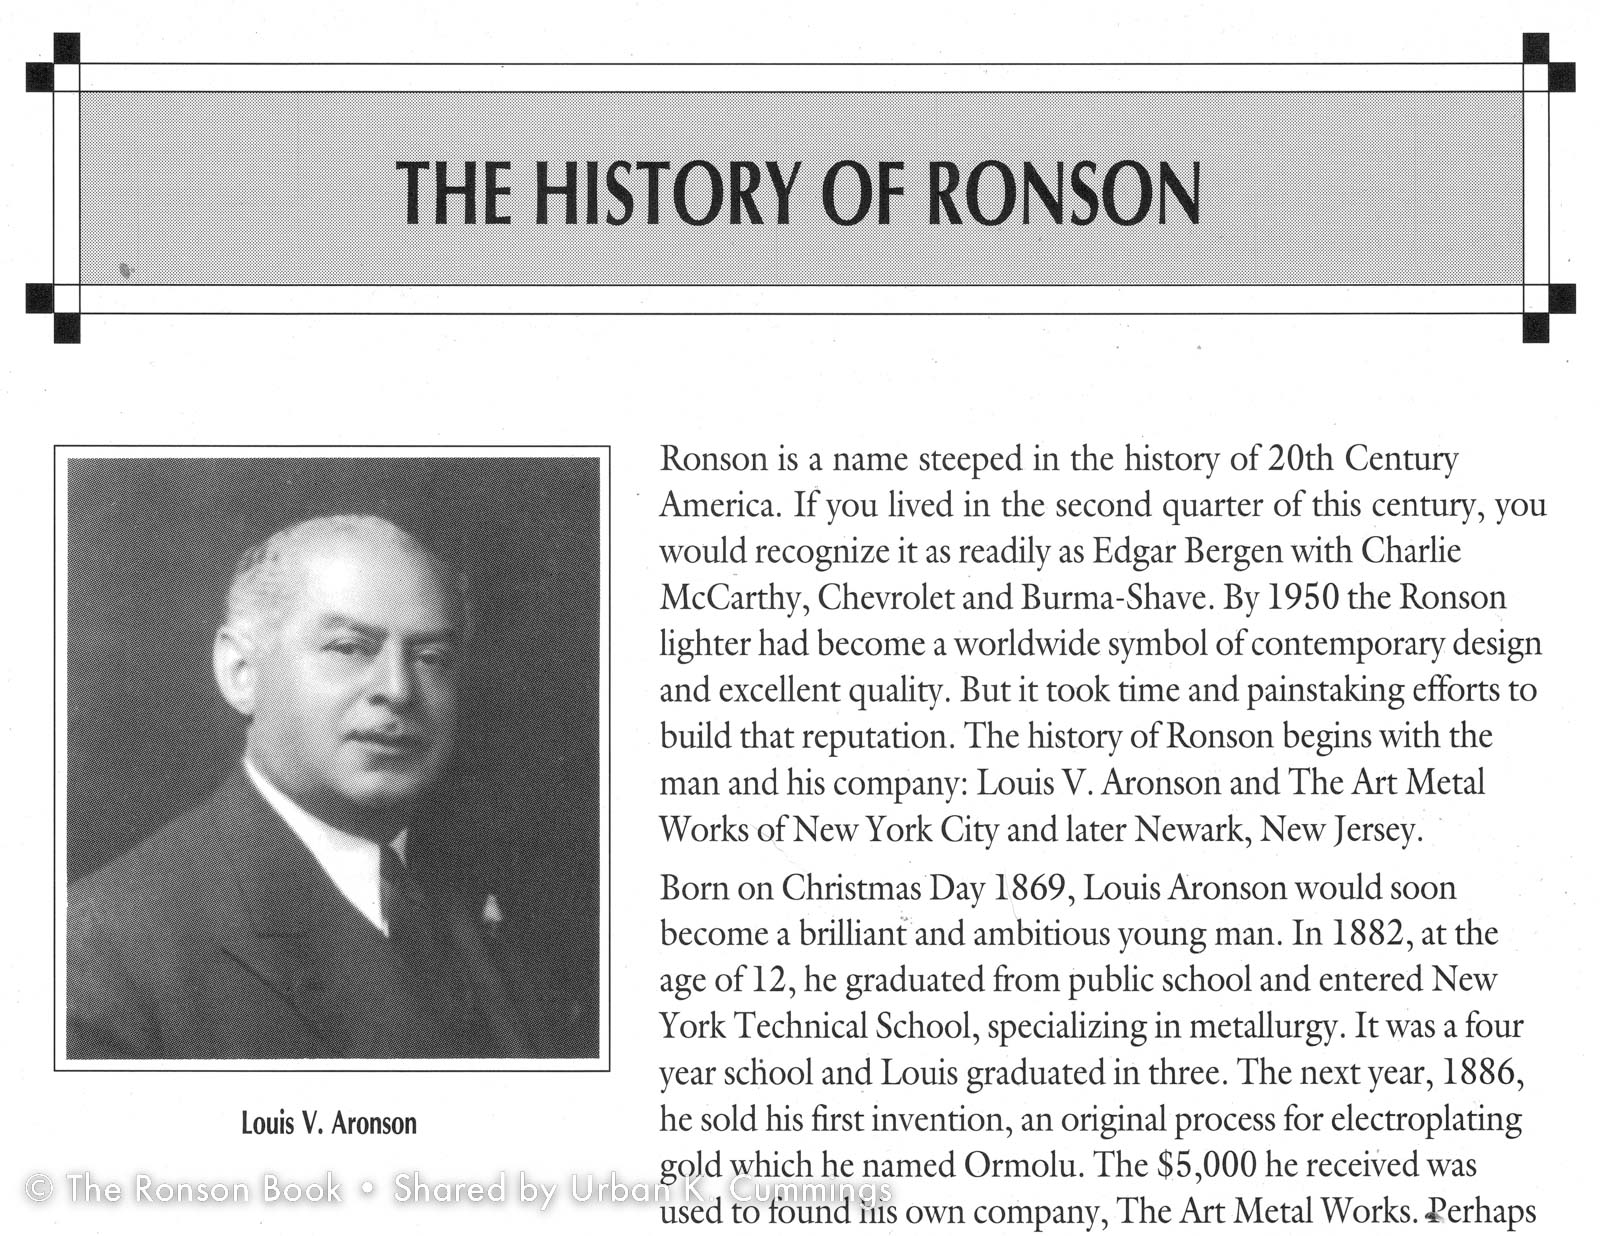 The History Of Ronson : by Urban Cummings